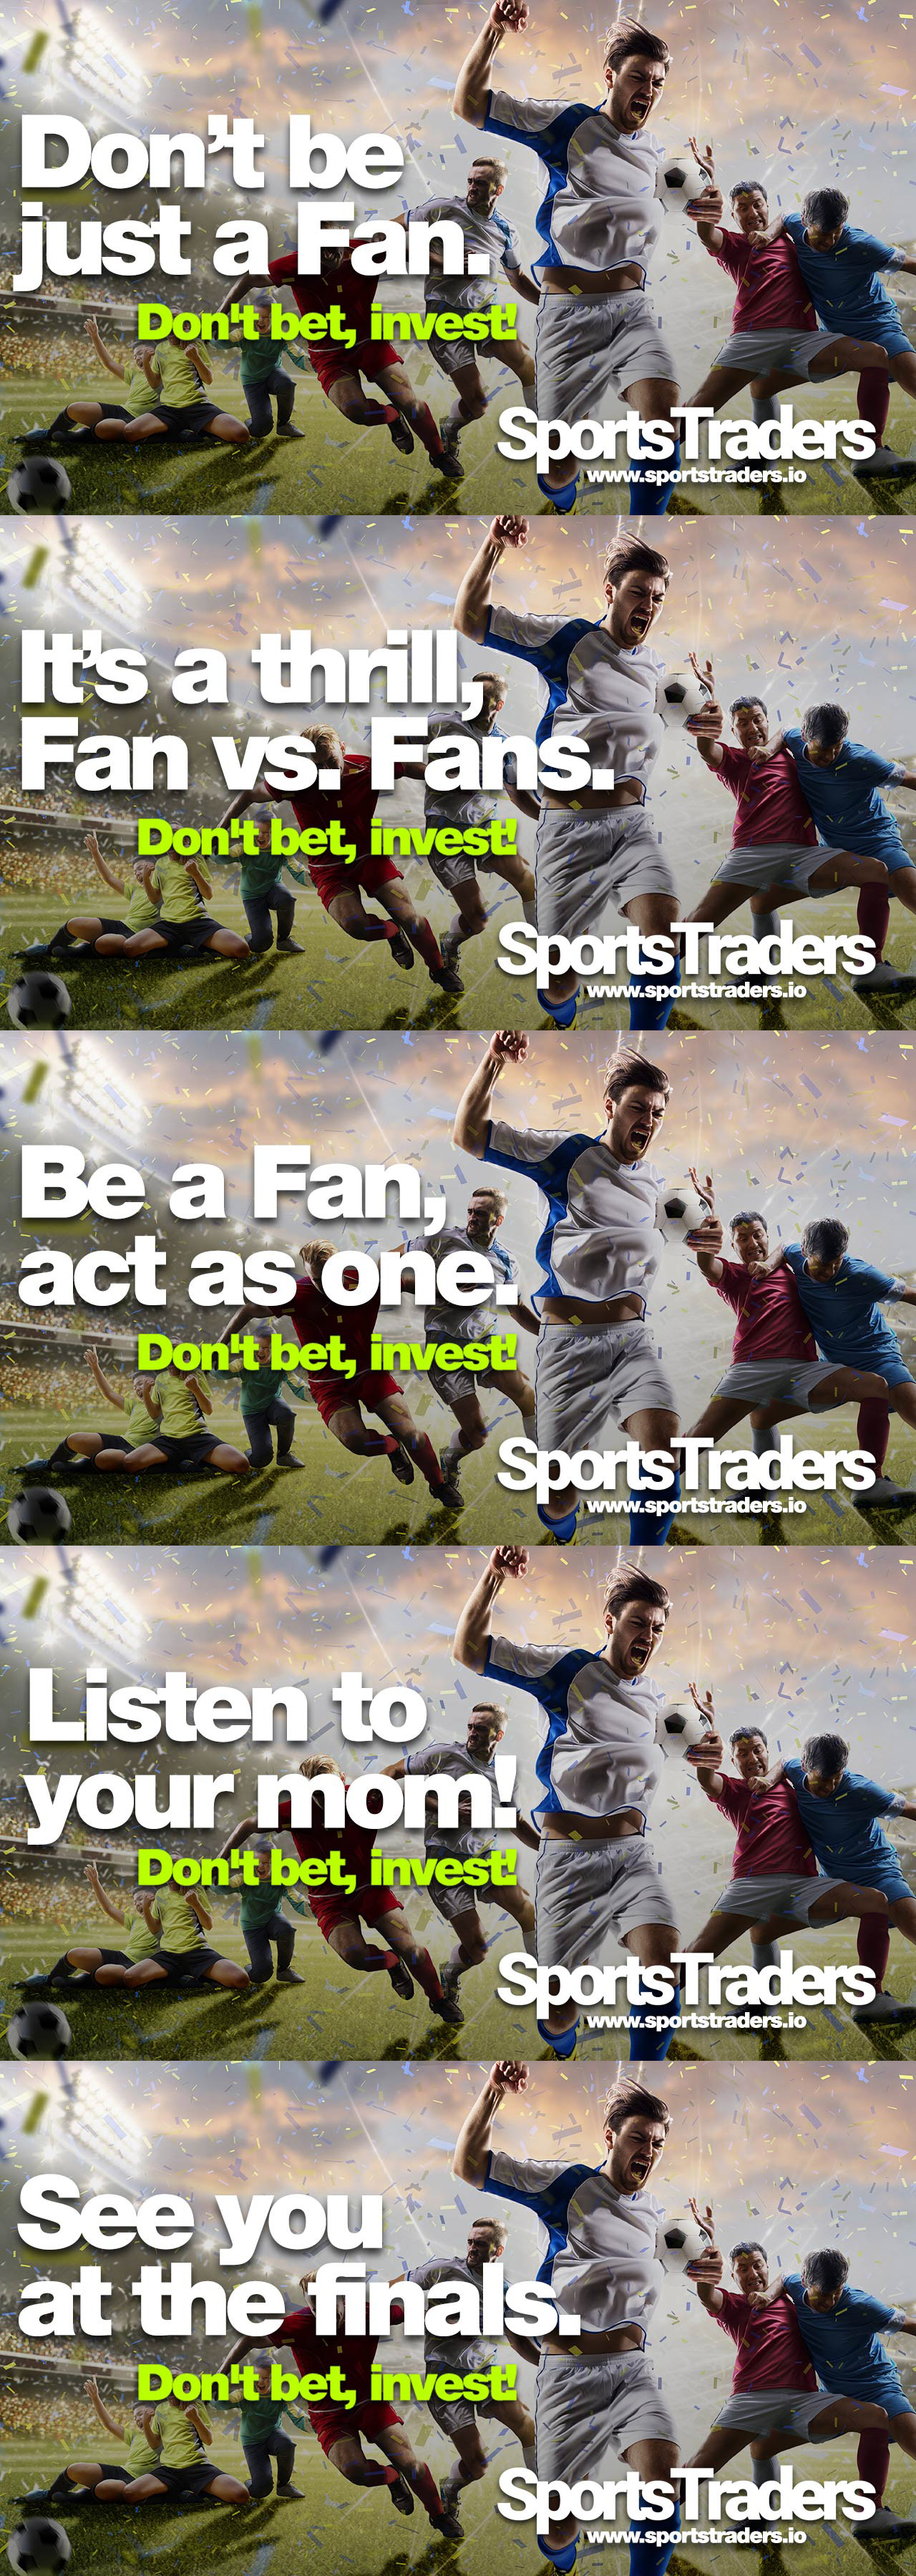 Sportstraders Campaign